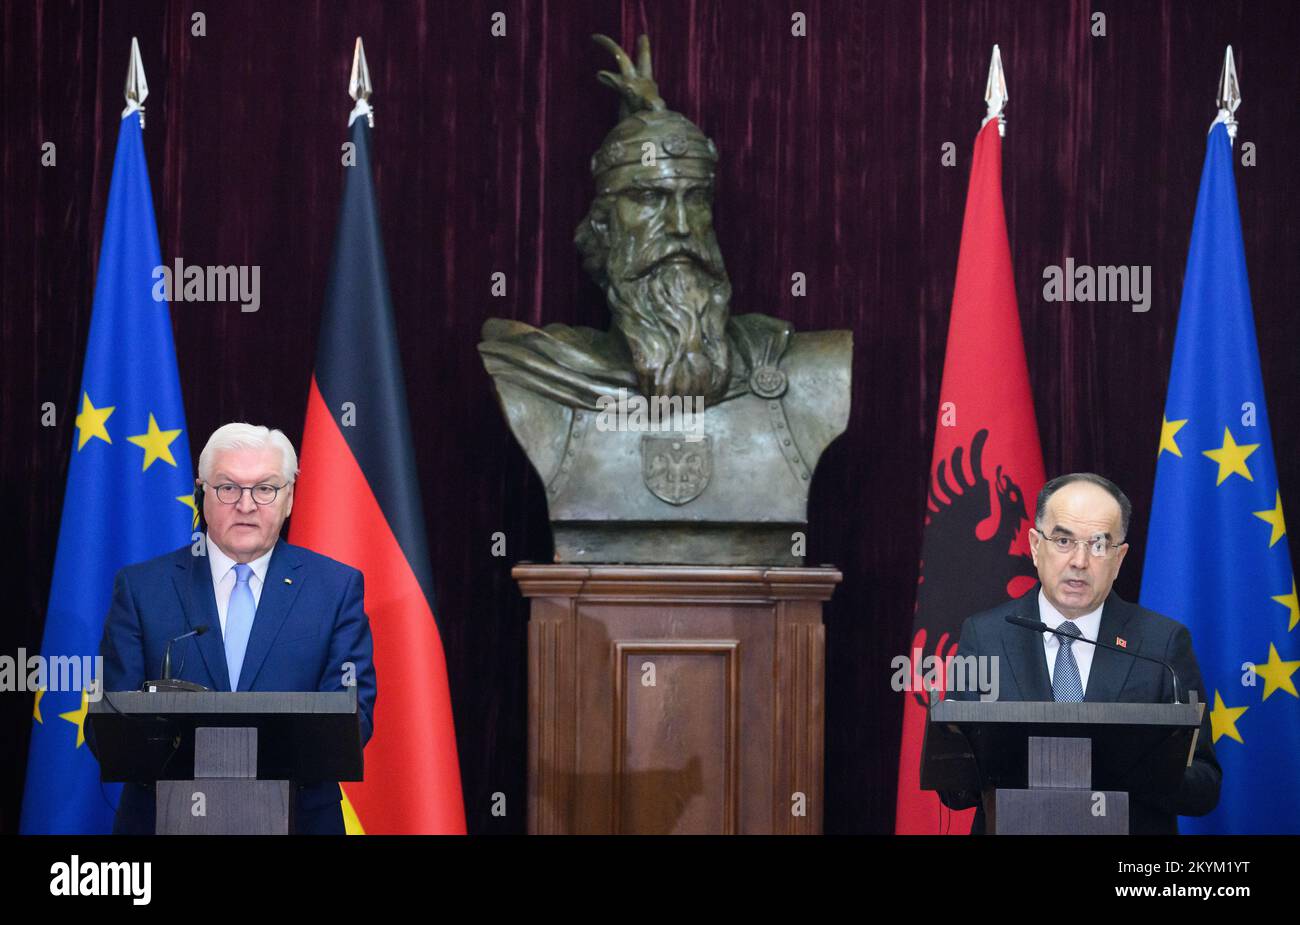 01 December 2022, Albania, Tirana: German President Frank-Walter Steinmeier (l) and Bajram Begaj, President of Albania, make remarks during a press conference after their talks at the President's official residence. Between them is the bust of Prince George Kastriota, known as Skanderbeg. President Steinmeier is visiting the countries of northern Macedonia and Albania during his four-day trip to the Balkans. In addition to the situation in the region and the effects of the Russian war of aggression in Ukraine, Germany's support for the countries' prospects of joining the European Union is the Stock Photo